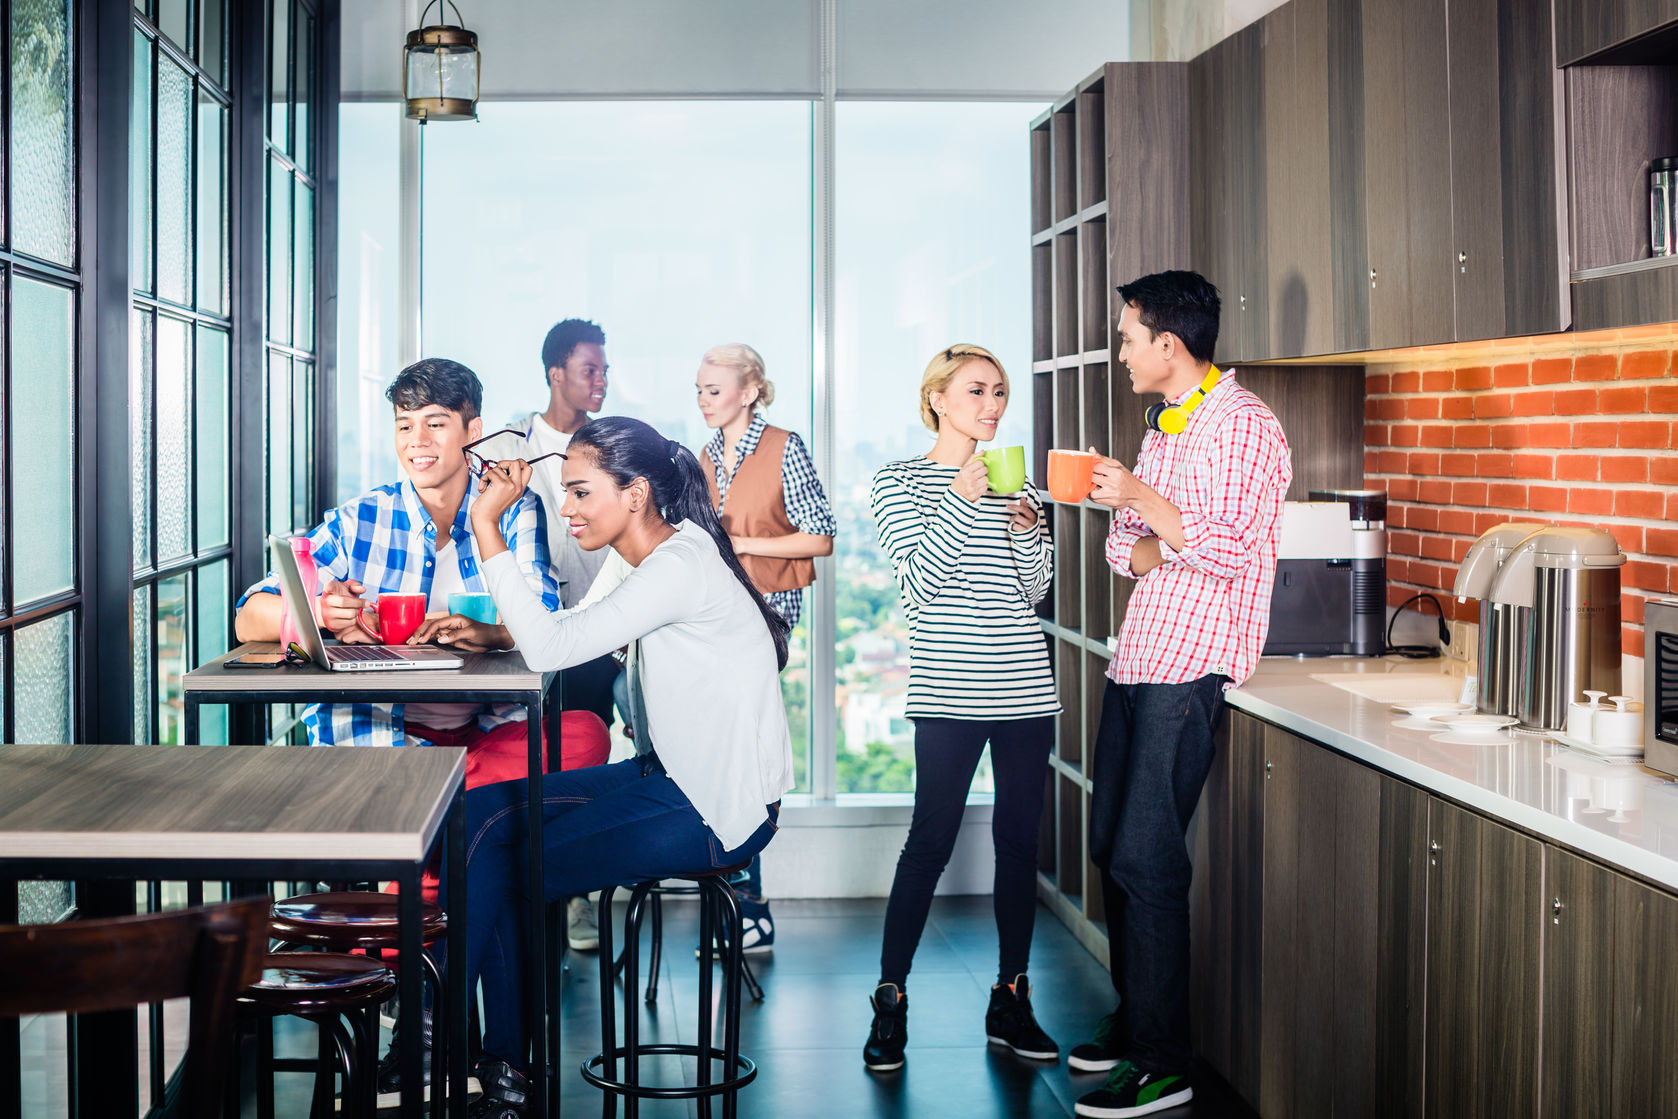 Break Room Culture: Don't Miss an Opportunity - Corporate Essentials